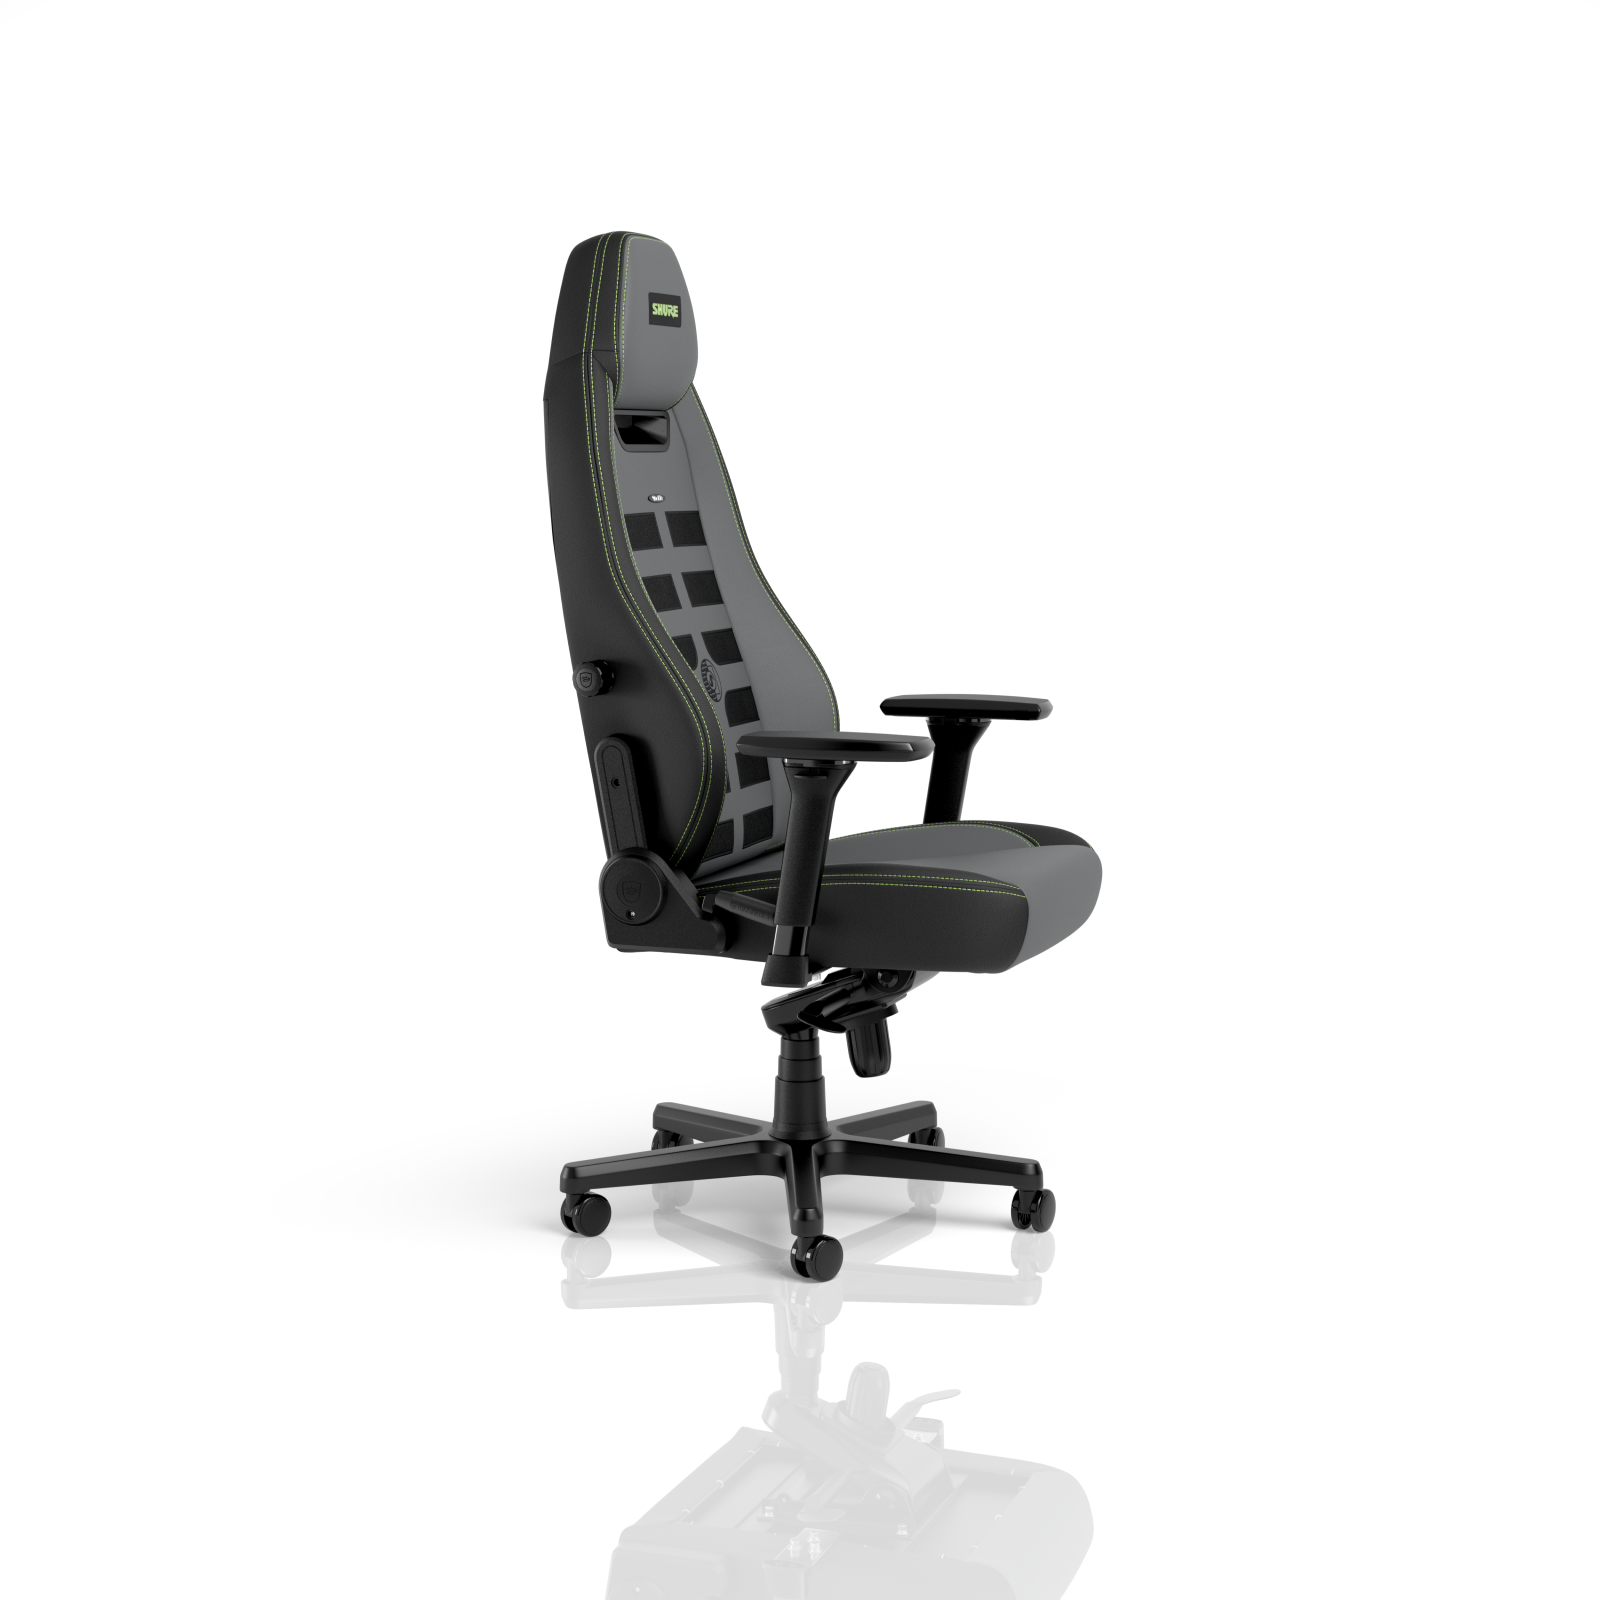 noblechairs LEGEND Gaming Chair Shure Edition